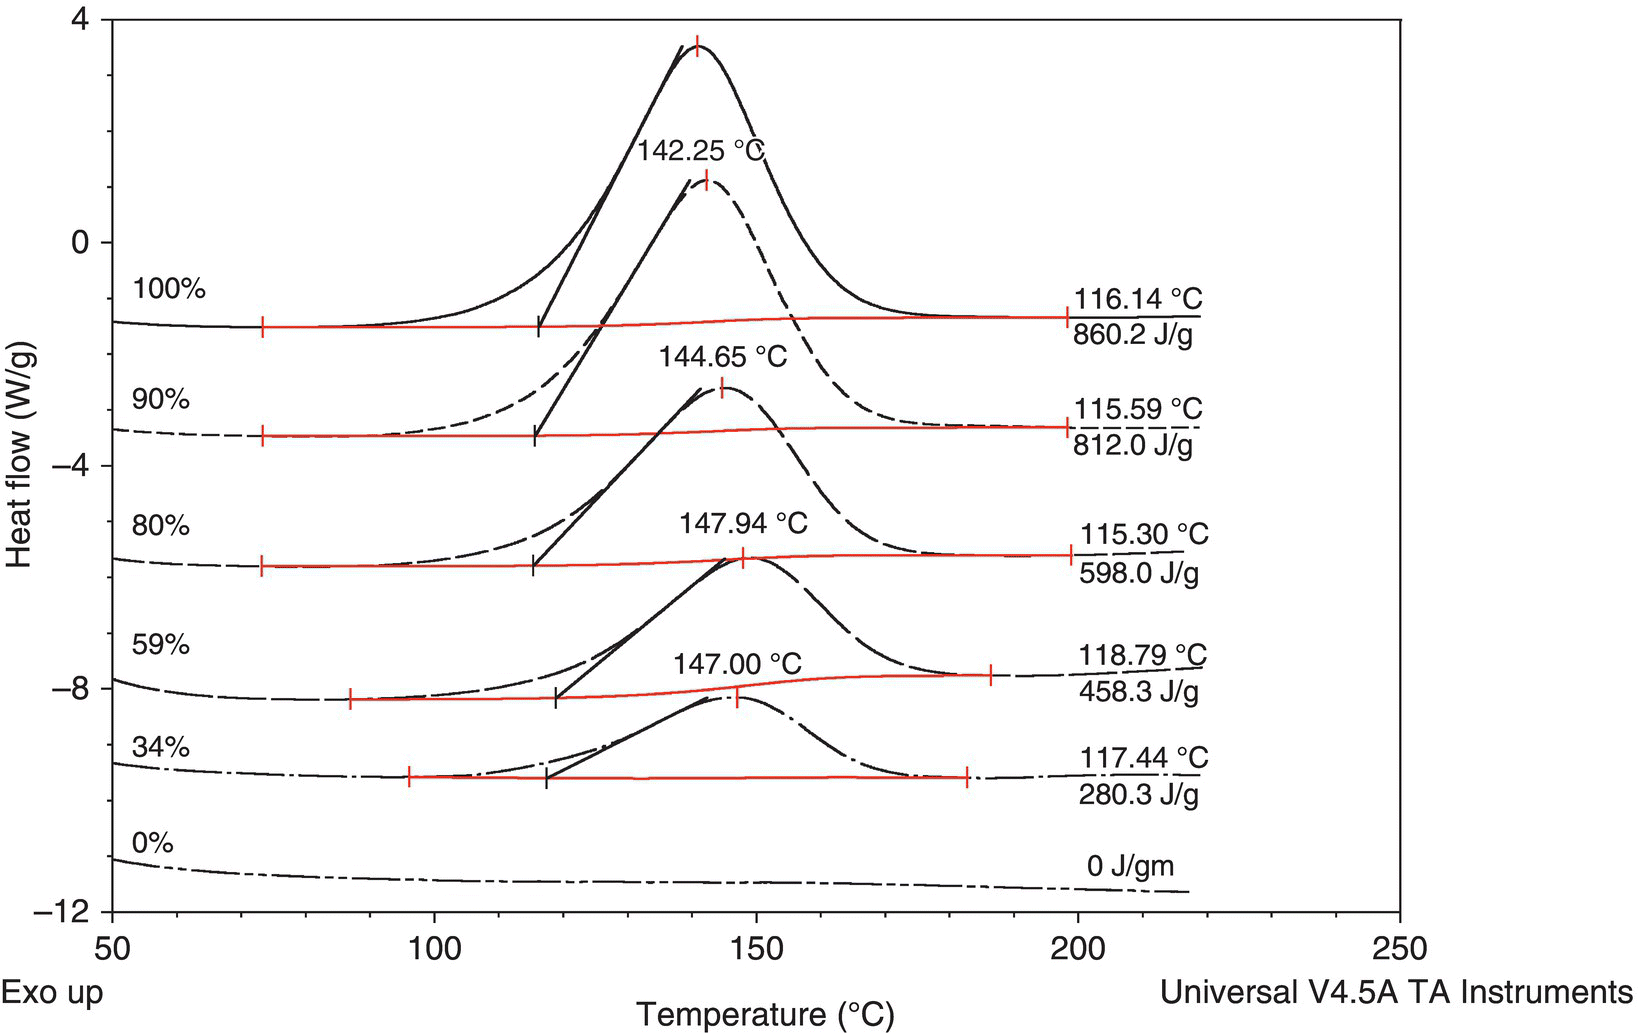 Graph of DSC peaks vs. concentration for compound 1, displaying bell-shaped curves for 100%, 90%, 80%, 59%, and 34% with peaks labeled 142.25 °C, 142.25 °C,144.65 °C, 147.94 °C, and 147.00 °C, respectively.